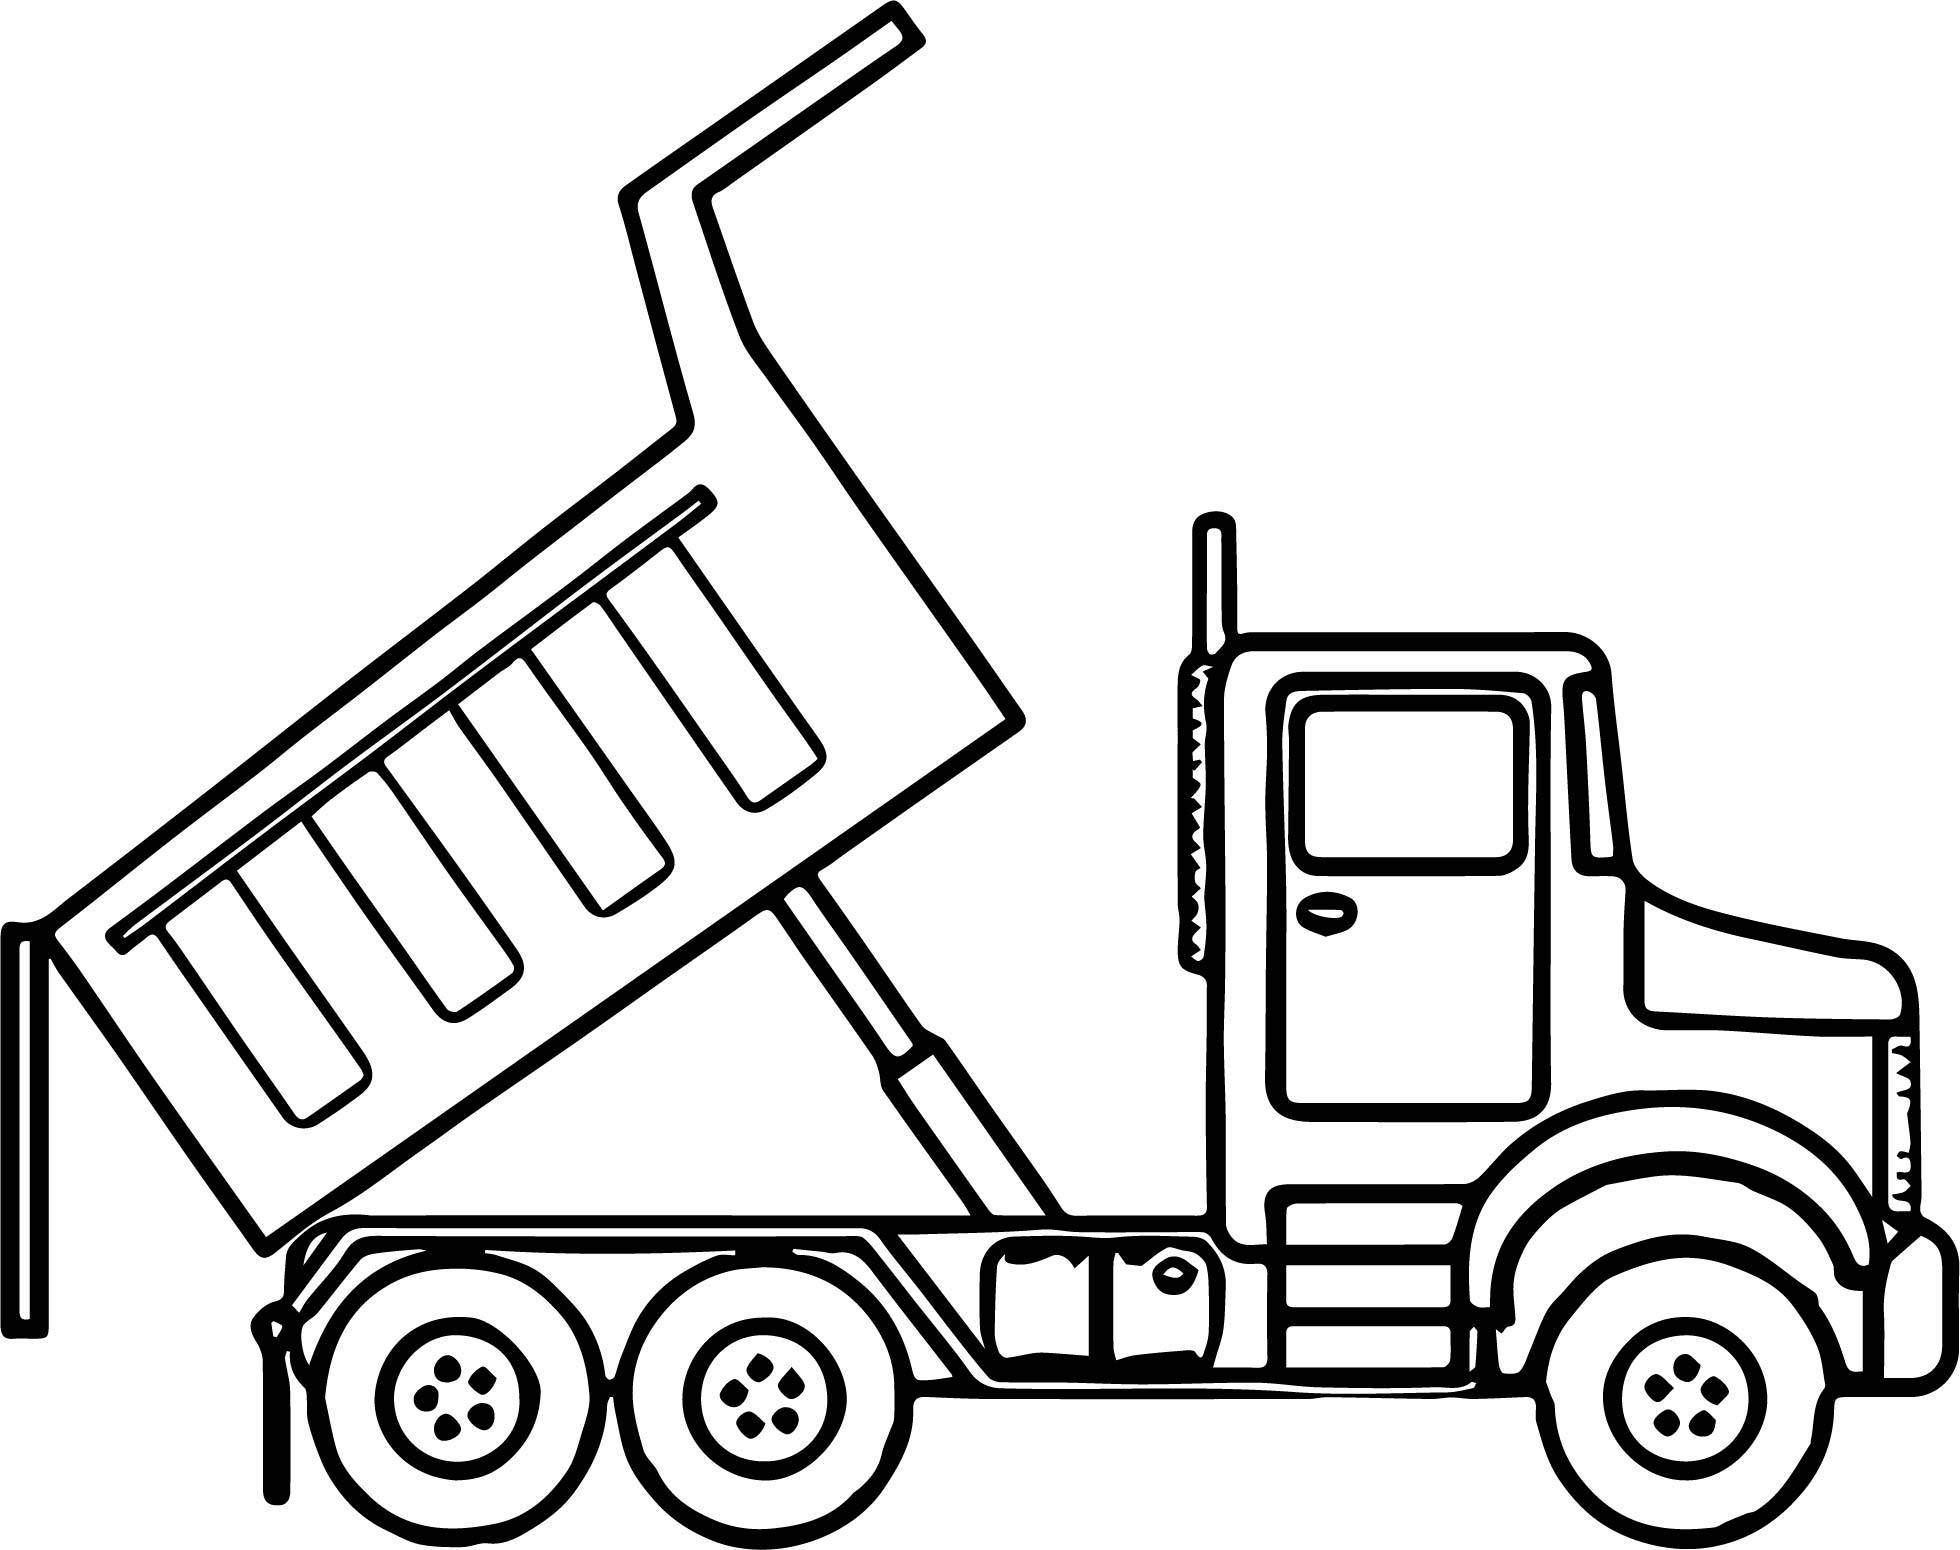 Toy Truck Coloring Pages at GetColorings.com | Free ...